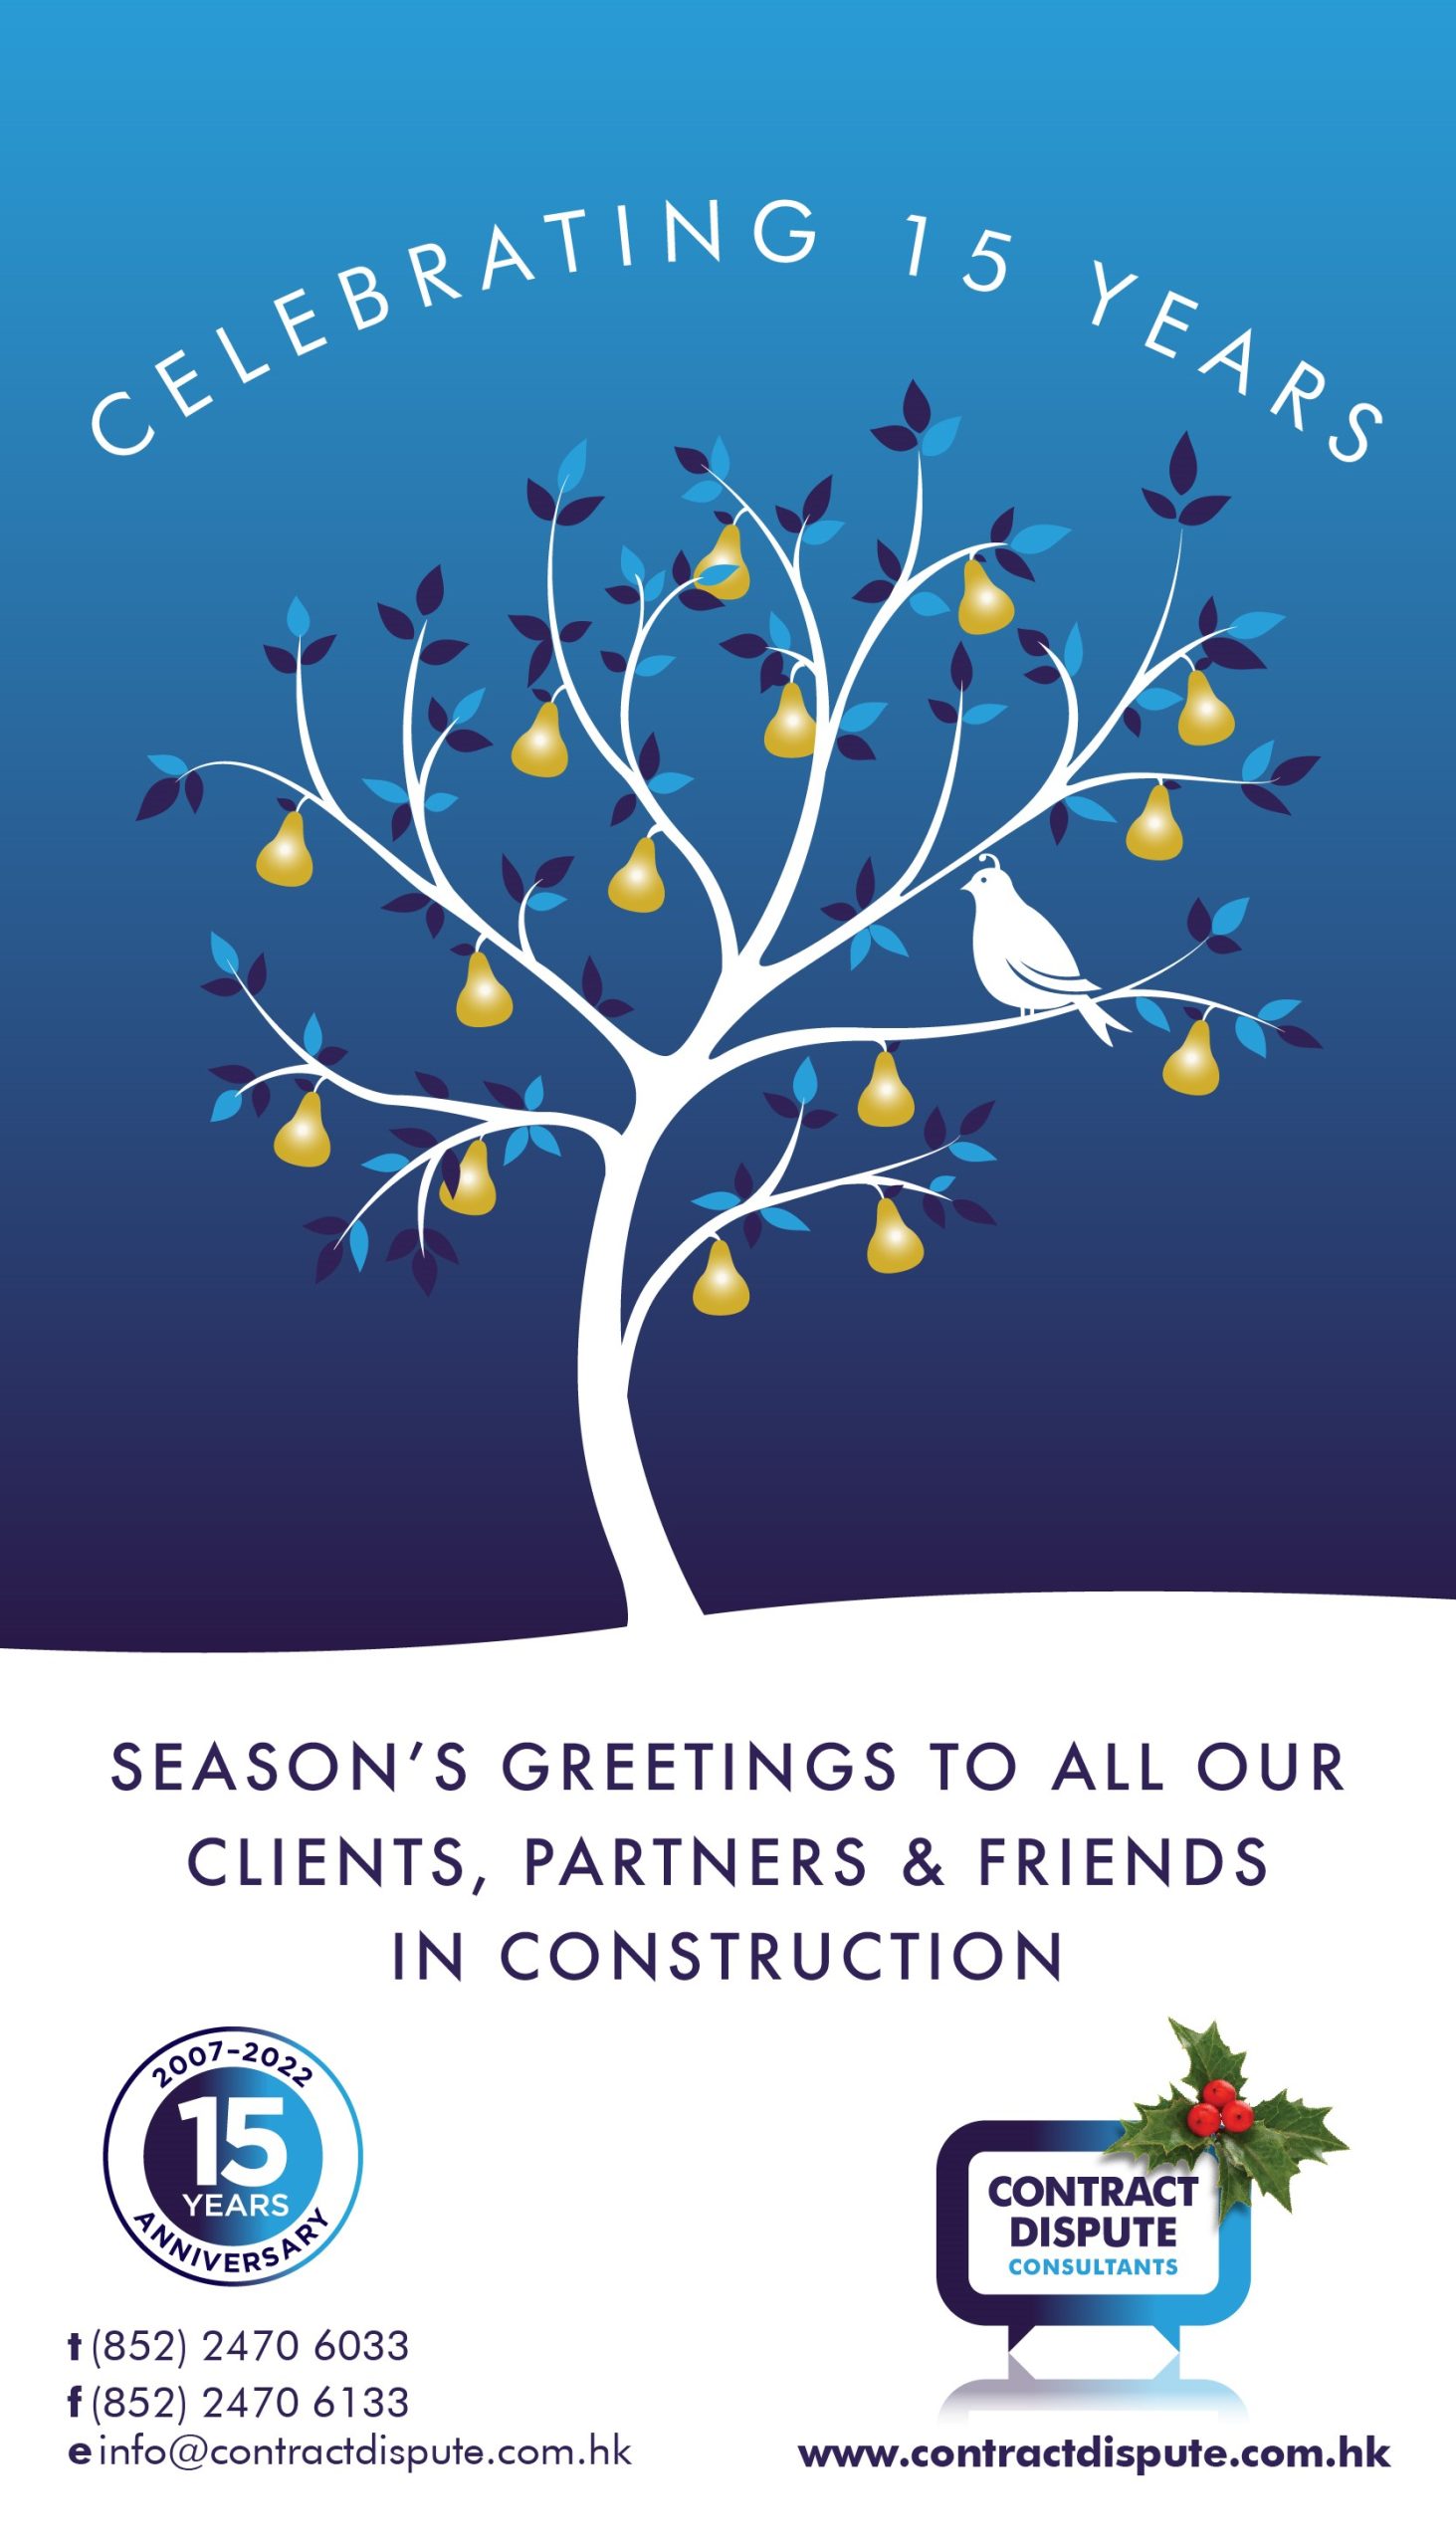 Season's greetings from the CDC team